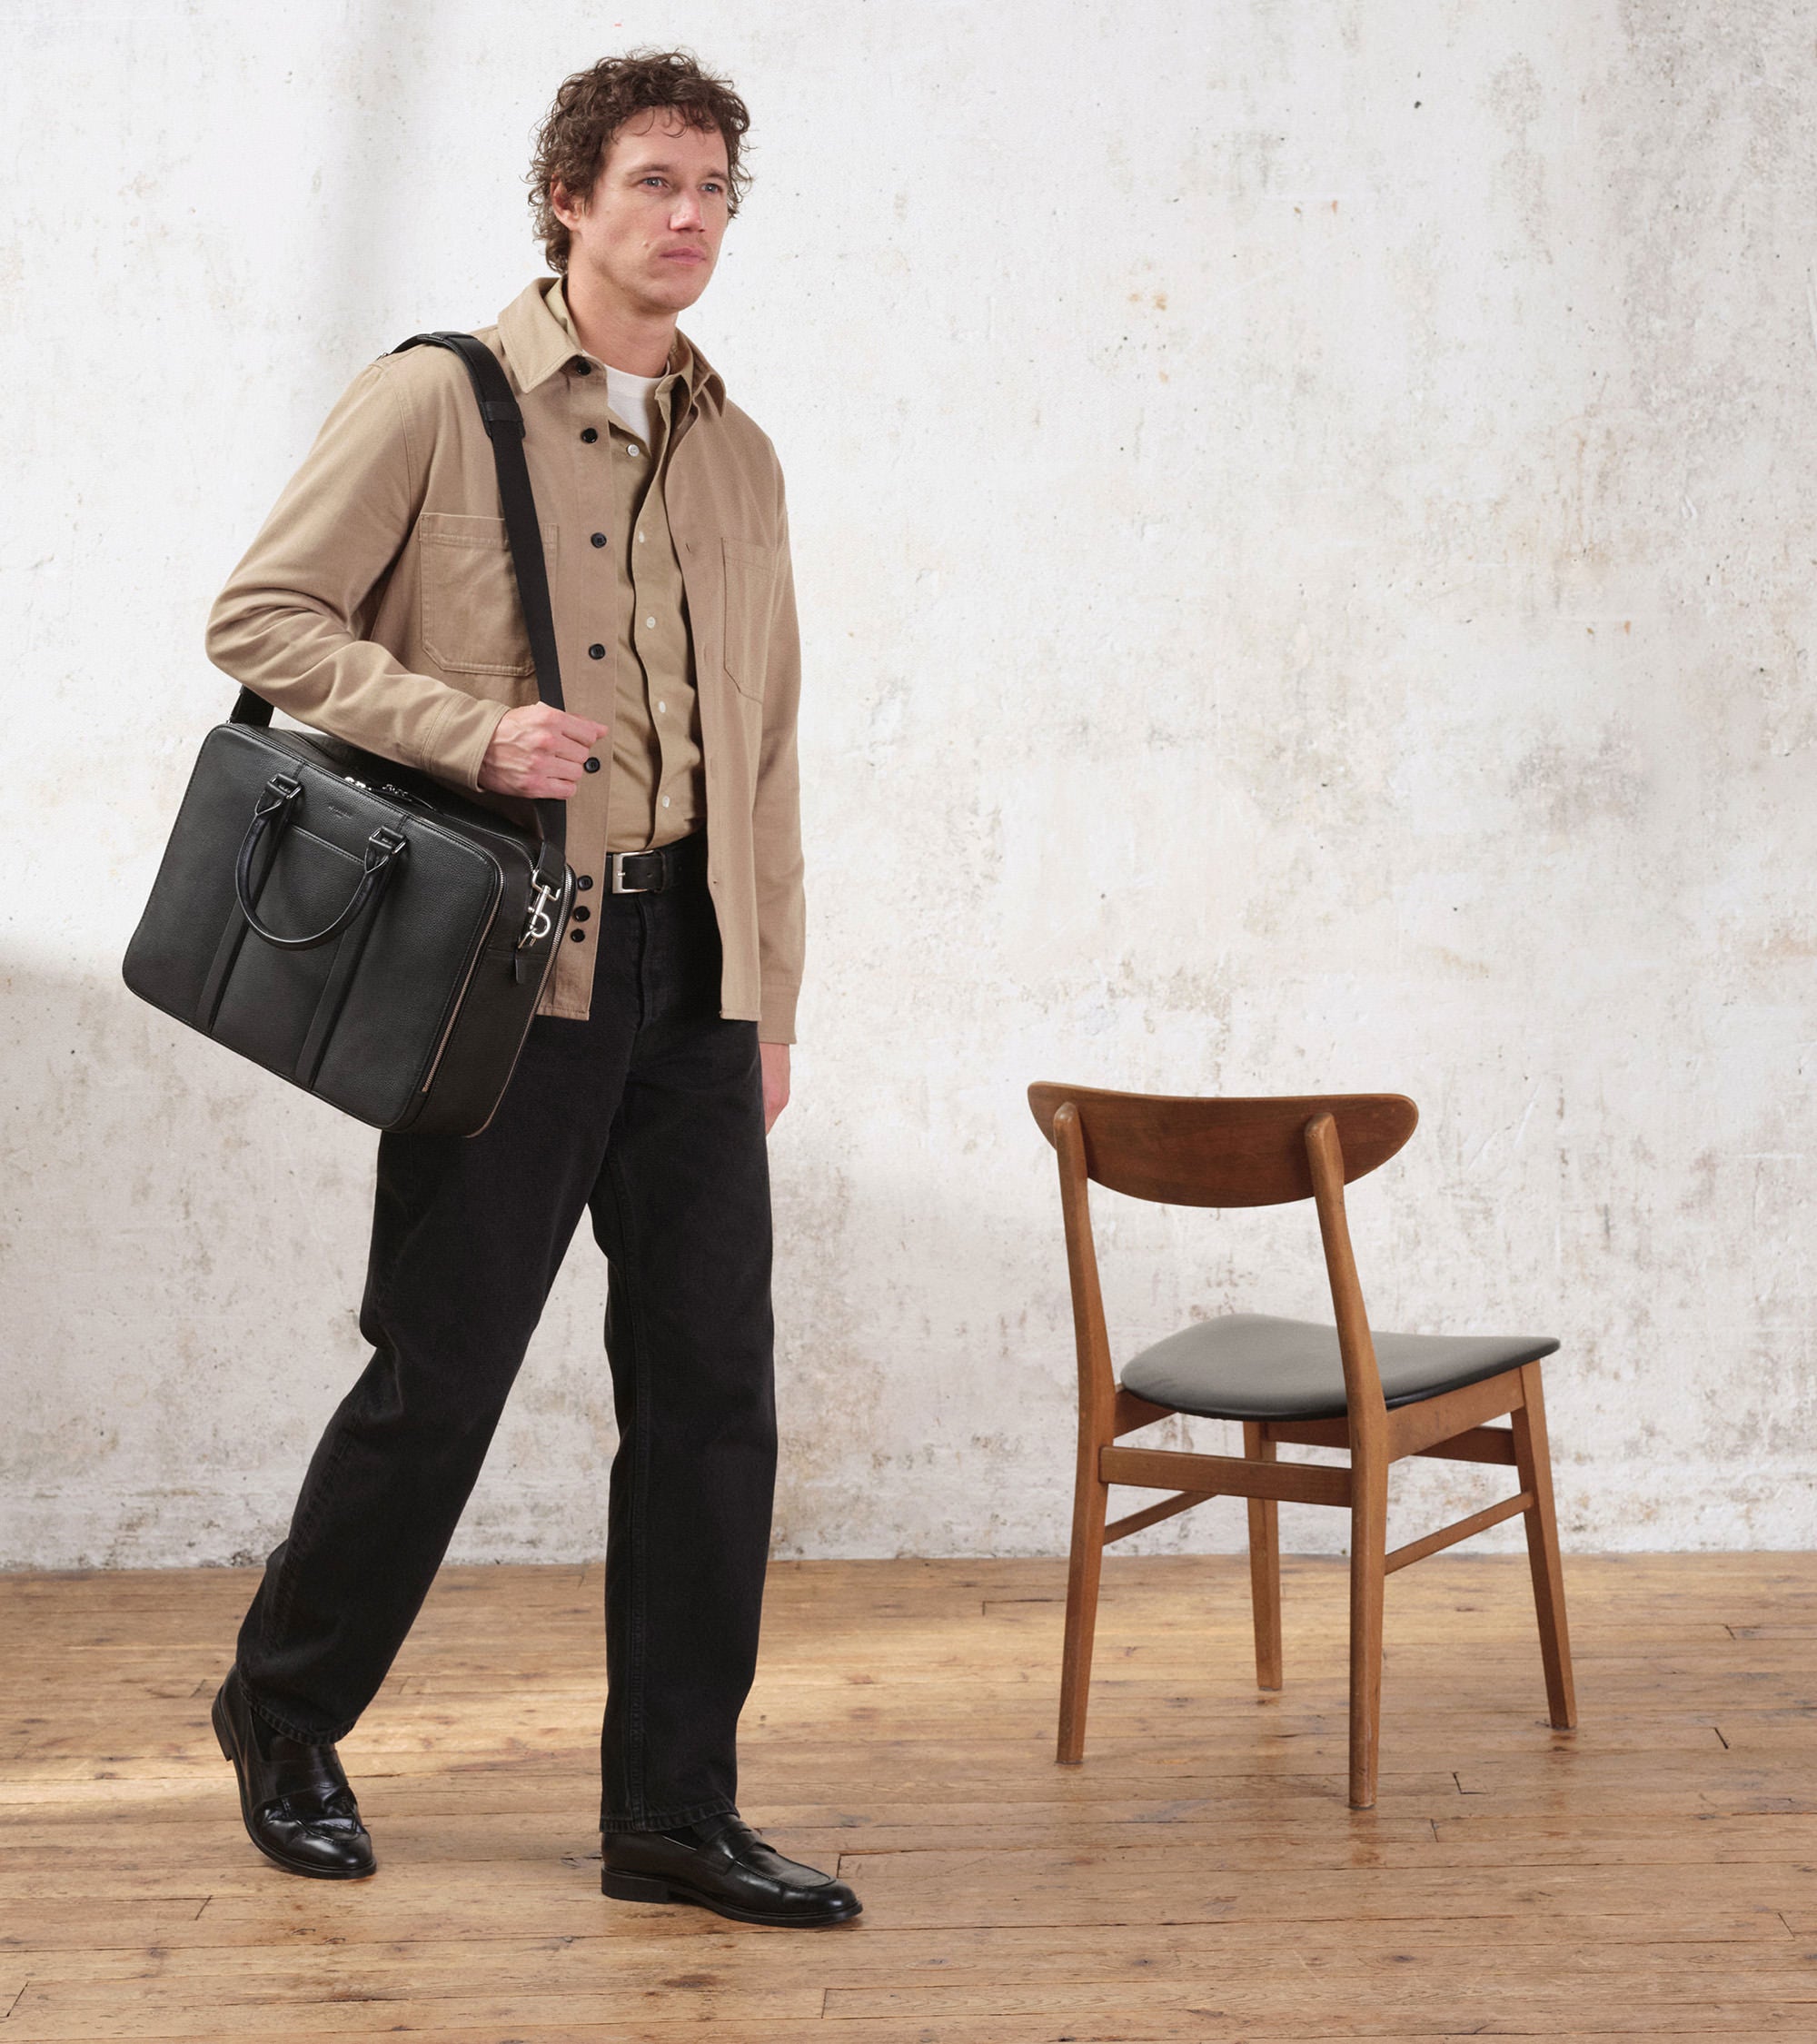 Charles 15 briefcase with 3 expanding compartments in grained leather